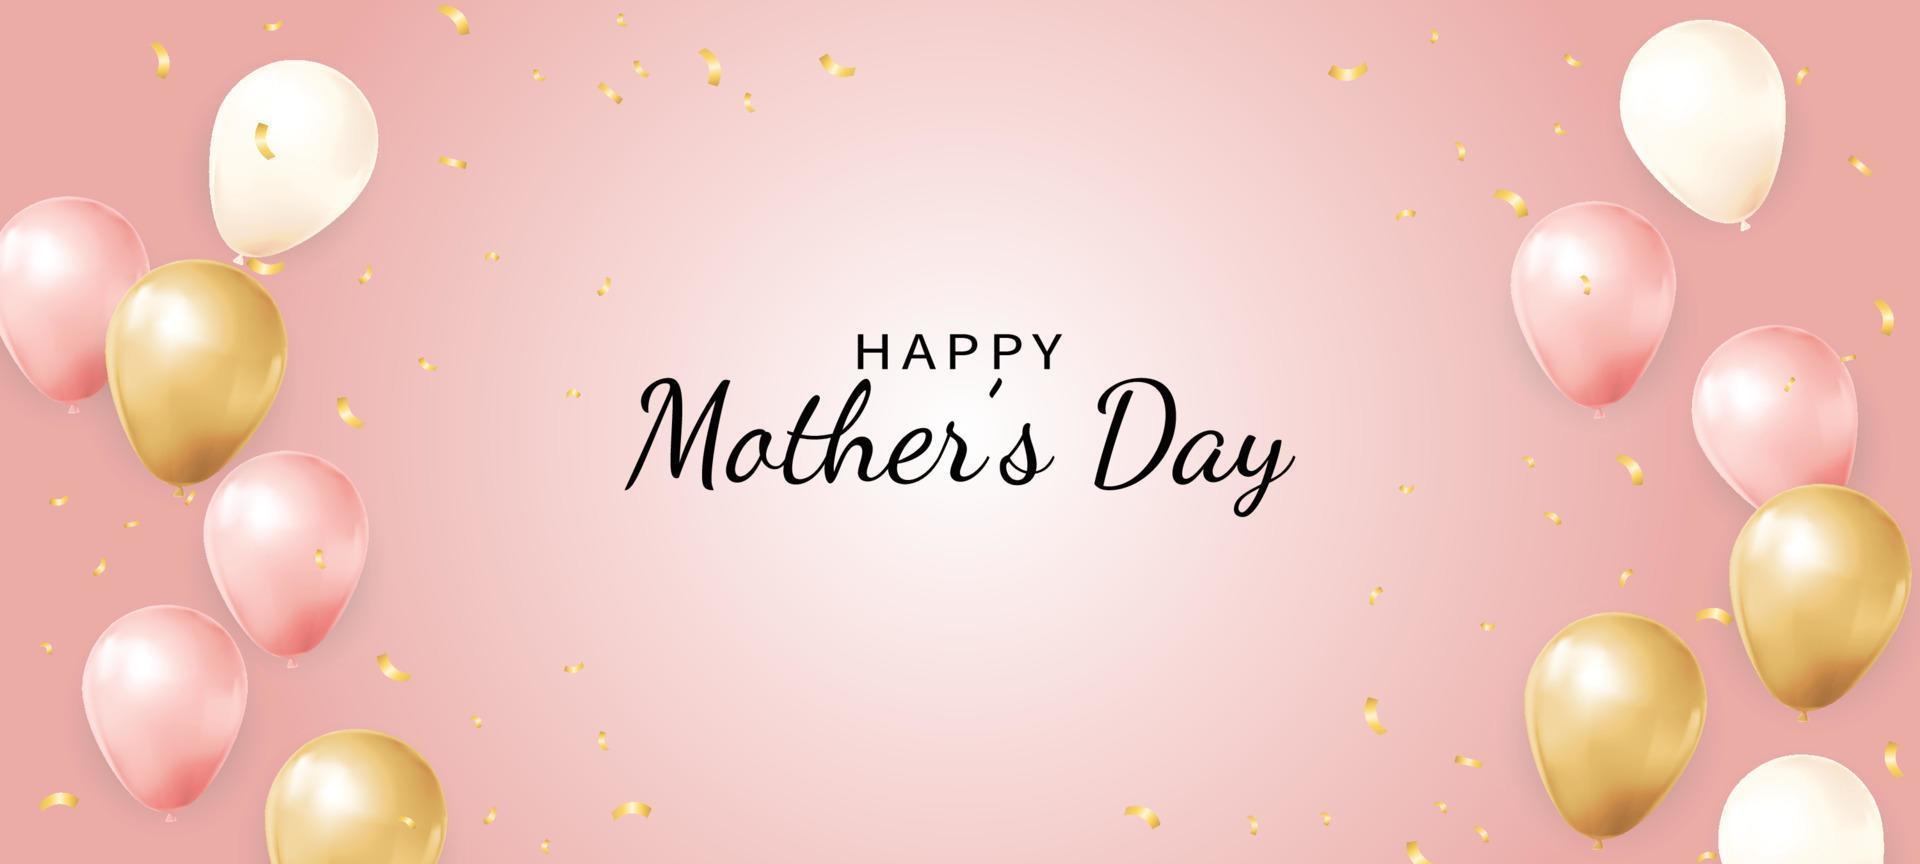 Mother's day vector banner with pink, white and gold balloons